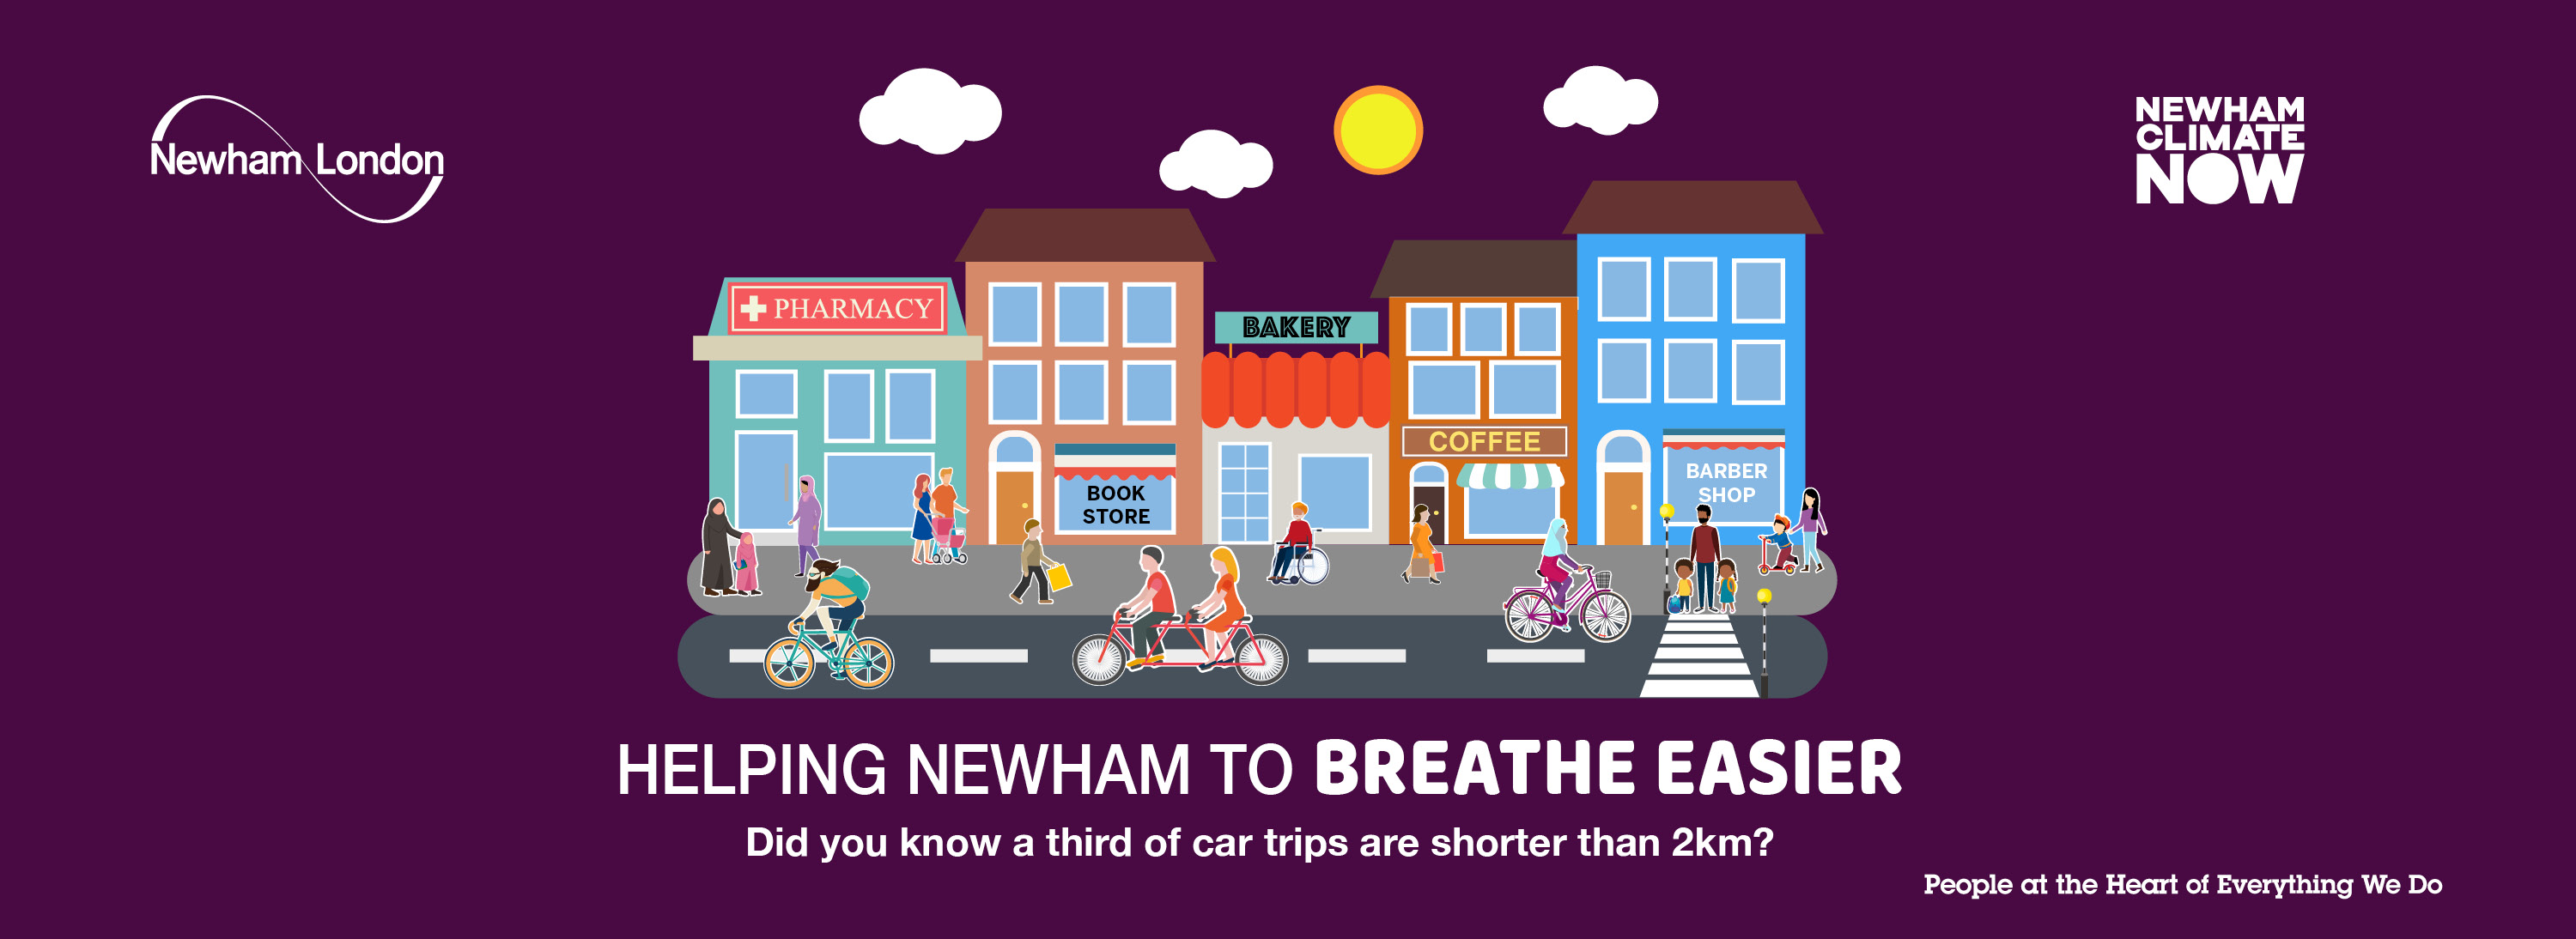 Did you know a third of car trips are shorter than 2km?